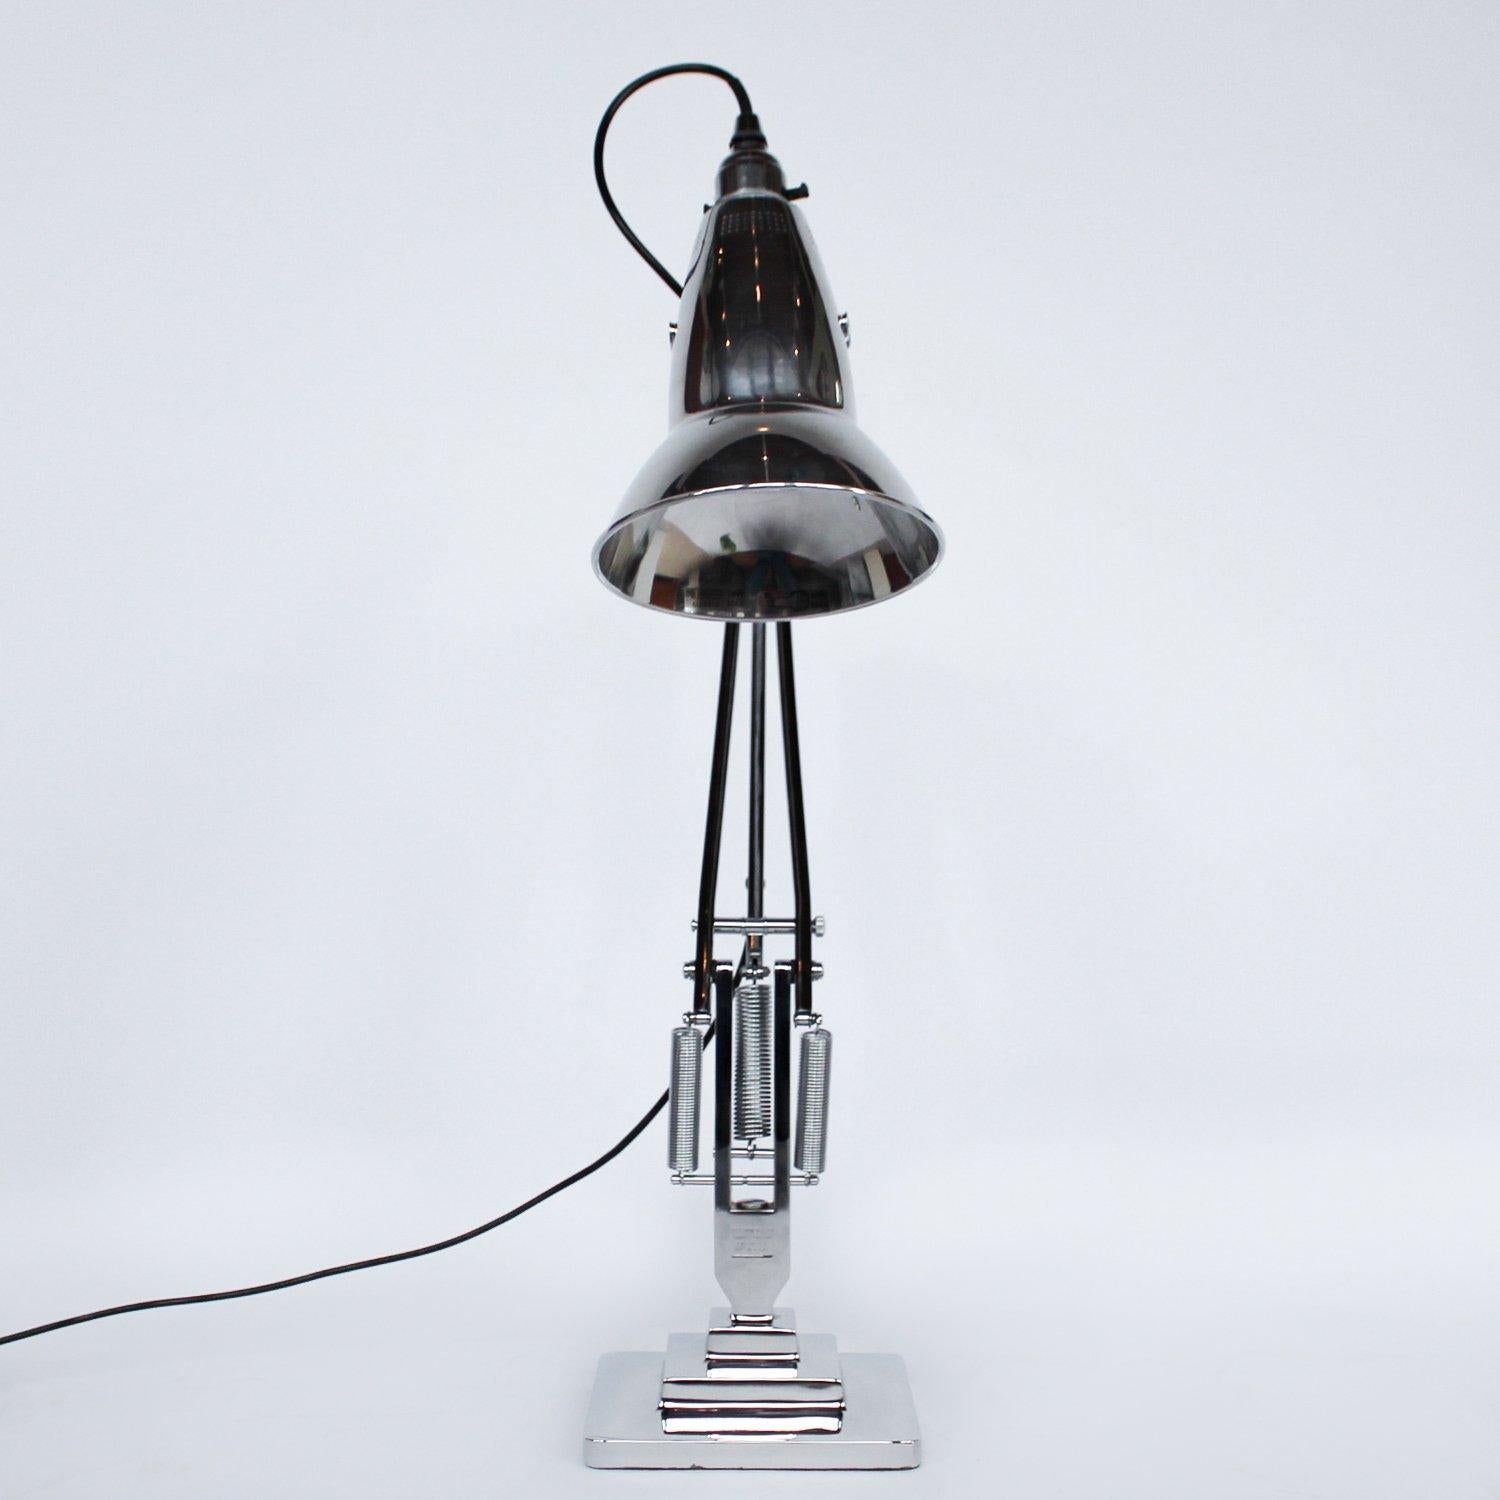 An Art Deco, 'three-spring' chromed and polished metal Anglepoise desk lamp by Herbert Terry & Sons. Three step base and perforated lamp shade. Original stamps to stem. The three spring Anglepoise lamp was first released by Herbert Terry &Sons in